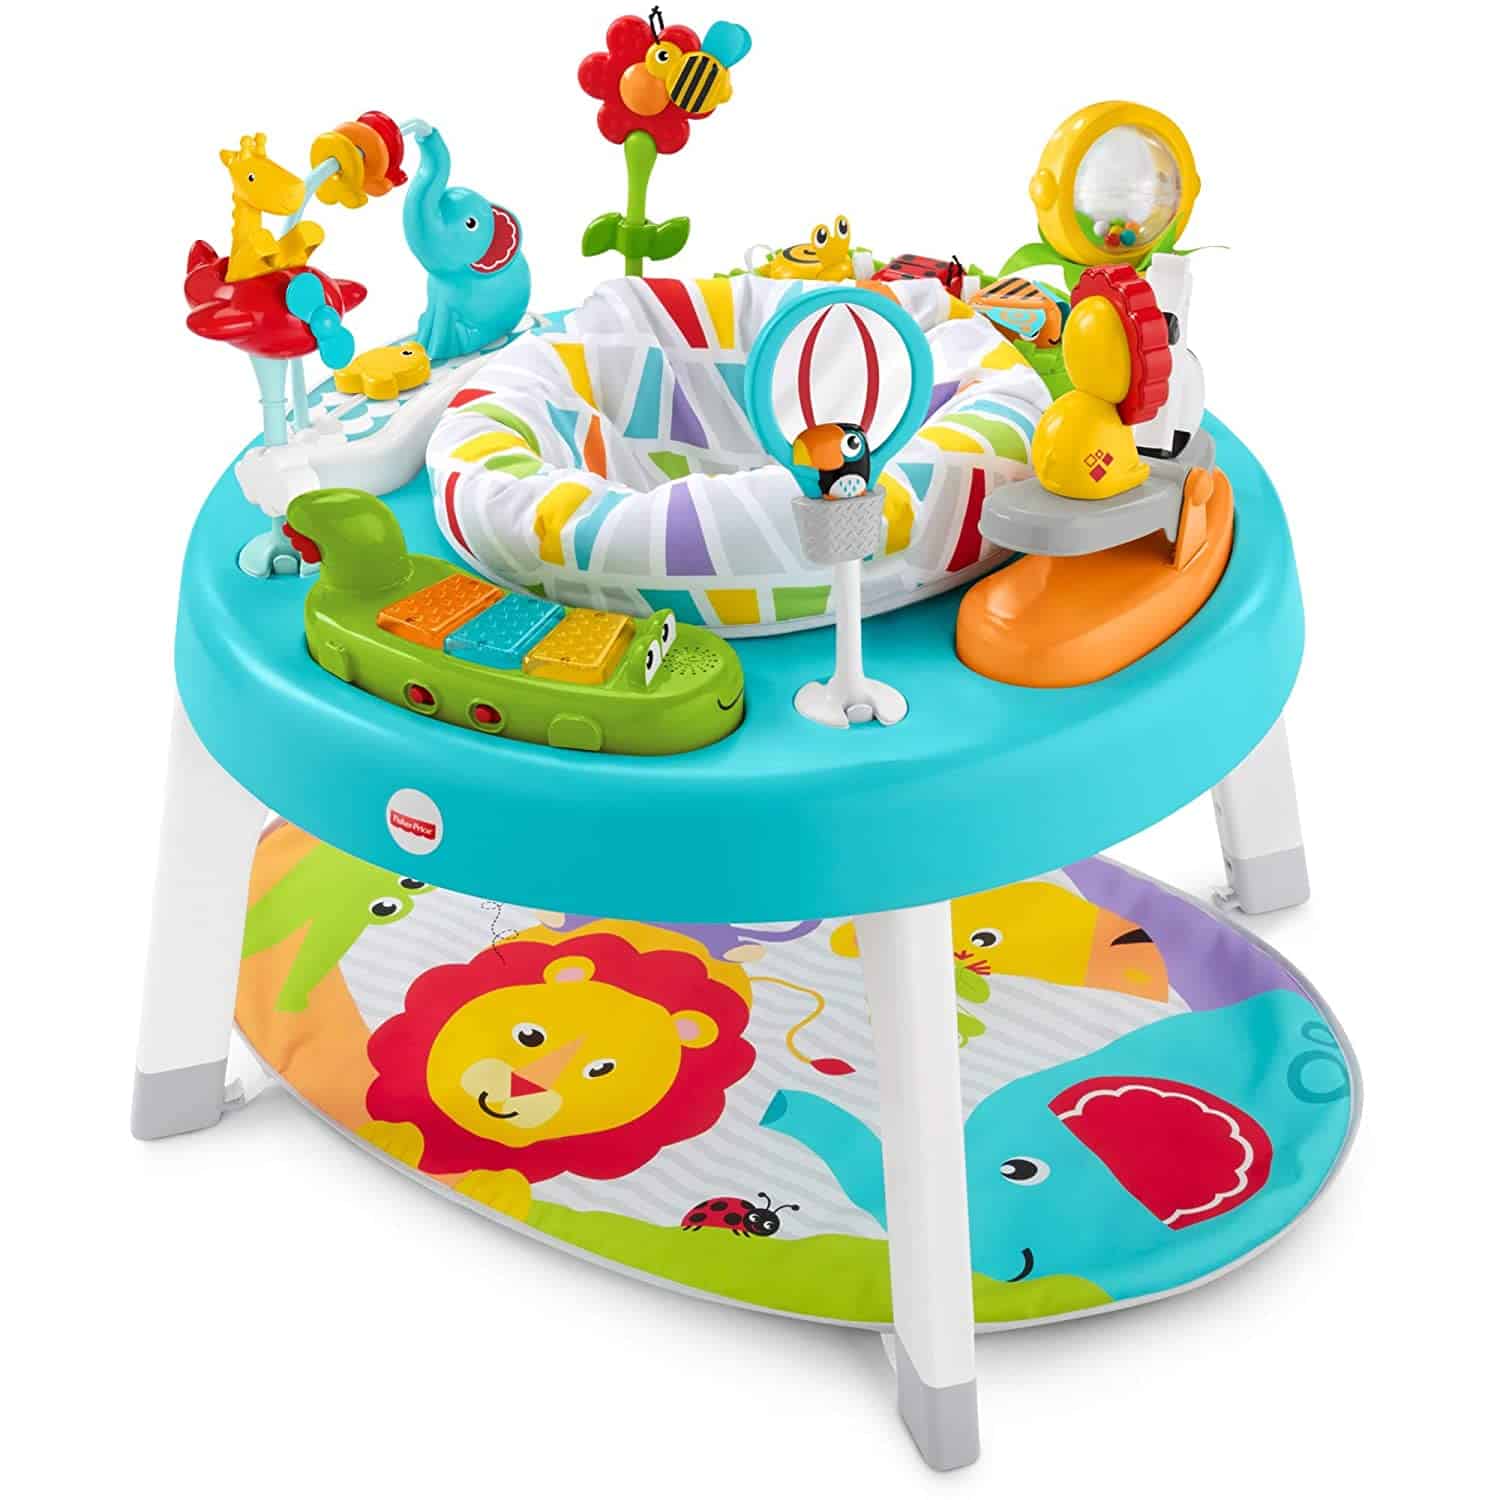 Best Baby Toys for 6 Month Olds